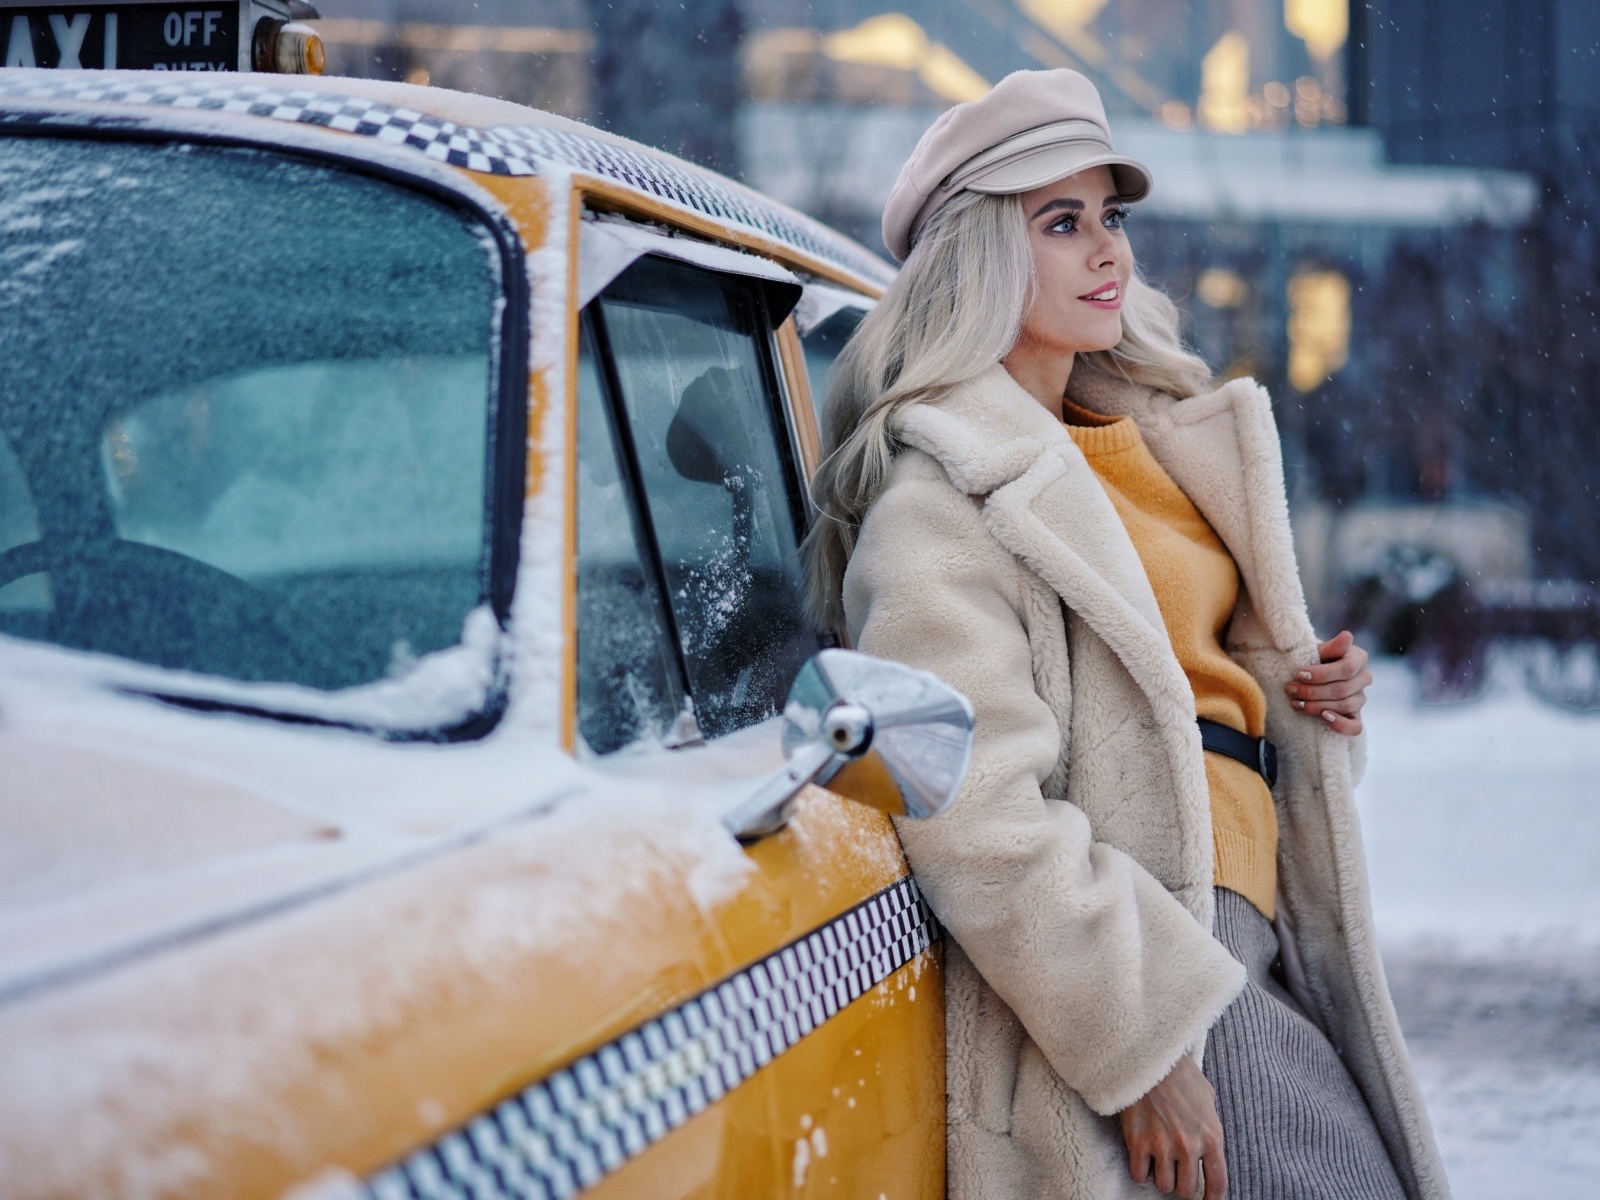 Winter Girl and Taxi wallpaper 1600x1200